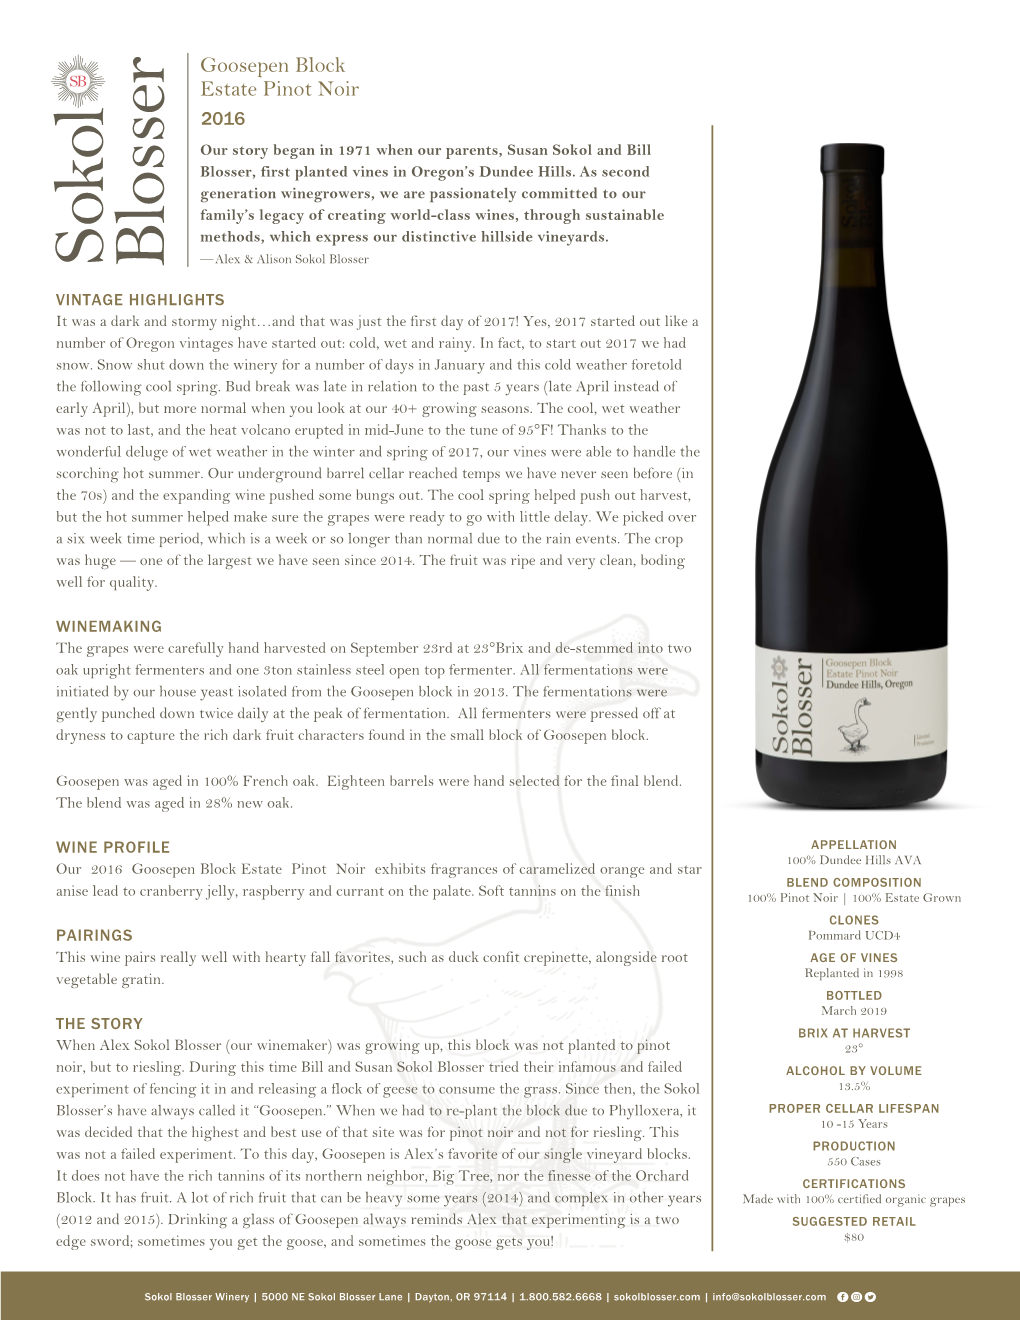 Goosepen Block Estate Pinot Noir 2016 Our Story Began in 1971 When Our Parents, Susan Sokol and Bill Blosser, First Planted Vines in Oregon’S Dundee Hills